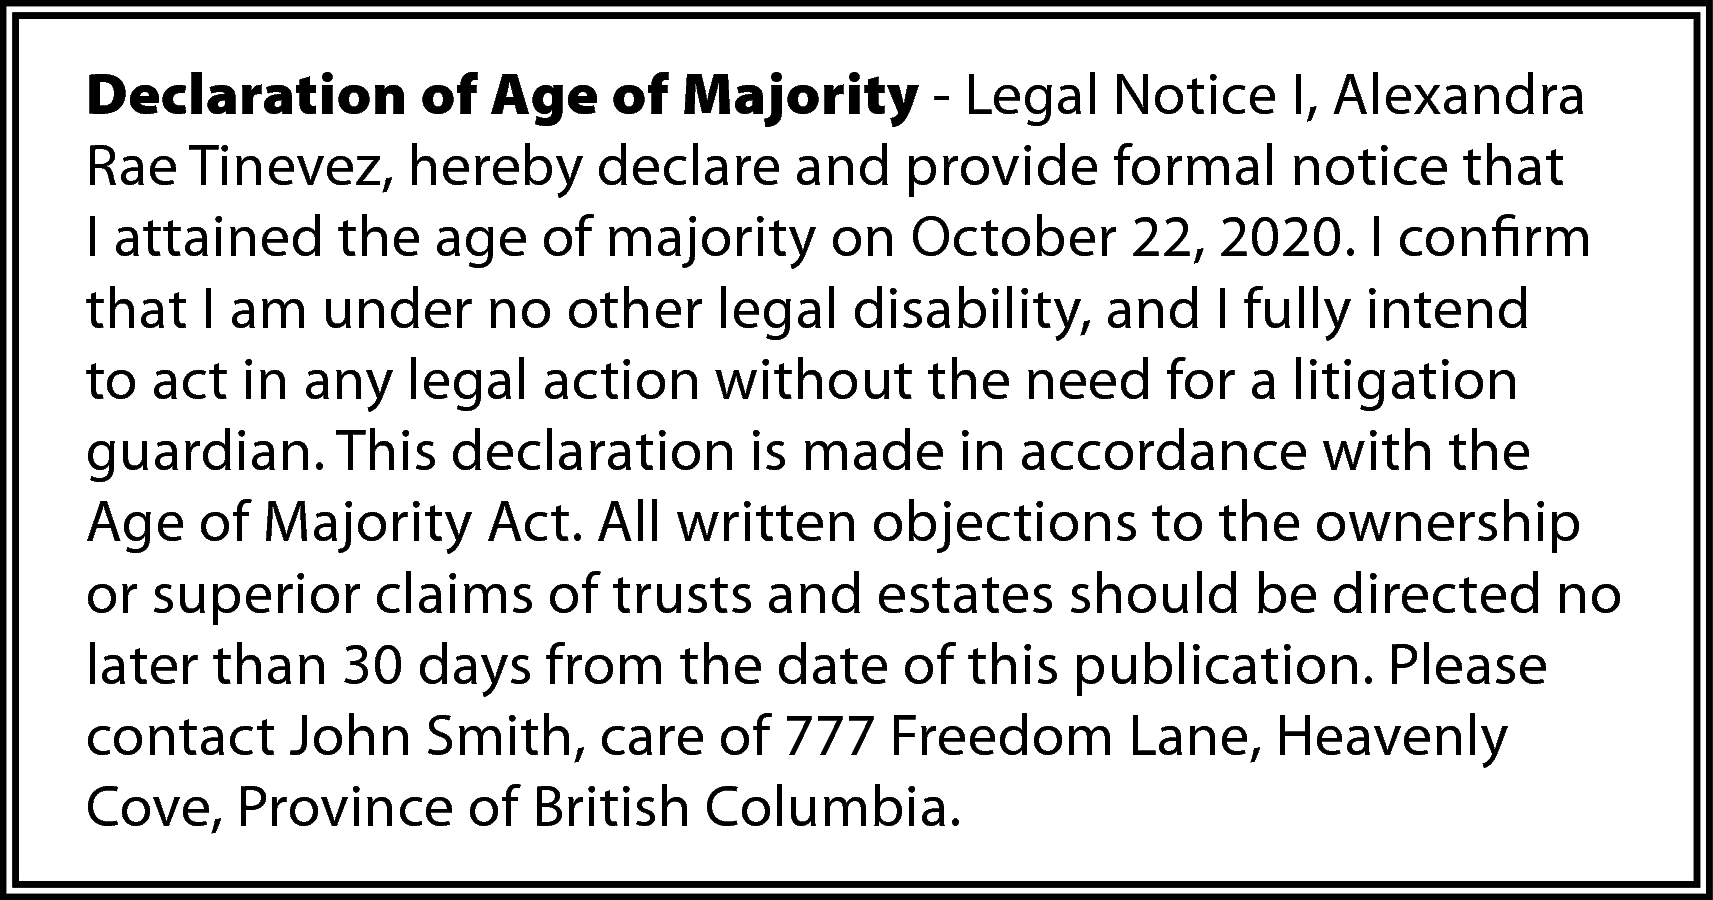 Declaration of Age of Majority  Declaration of Age of Majority - Legal Notice I, Alexandra  Rae Tinevez, hereby declare and provide formal notice that  I attained the age of majority on October 22, 2020. I confirm  that I am under no other legal disability, and I fully intend  to act in any legal action without the need for a litigation  guardian. This declaration is made in accordance with the  Age of Majority Act. All written objections to the ownership  or superior claims of trusts and estates should be directed no  later than 30 days from the date of this publication. Please  contact John Smith, care of 777 Freedom Lane, Heavenly  Cove, Province of British Columbia.    